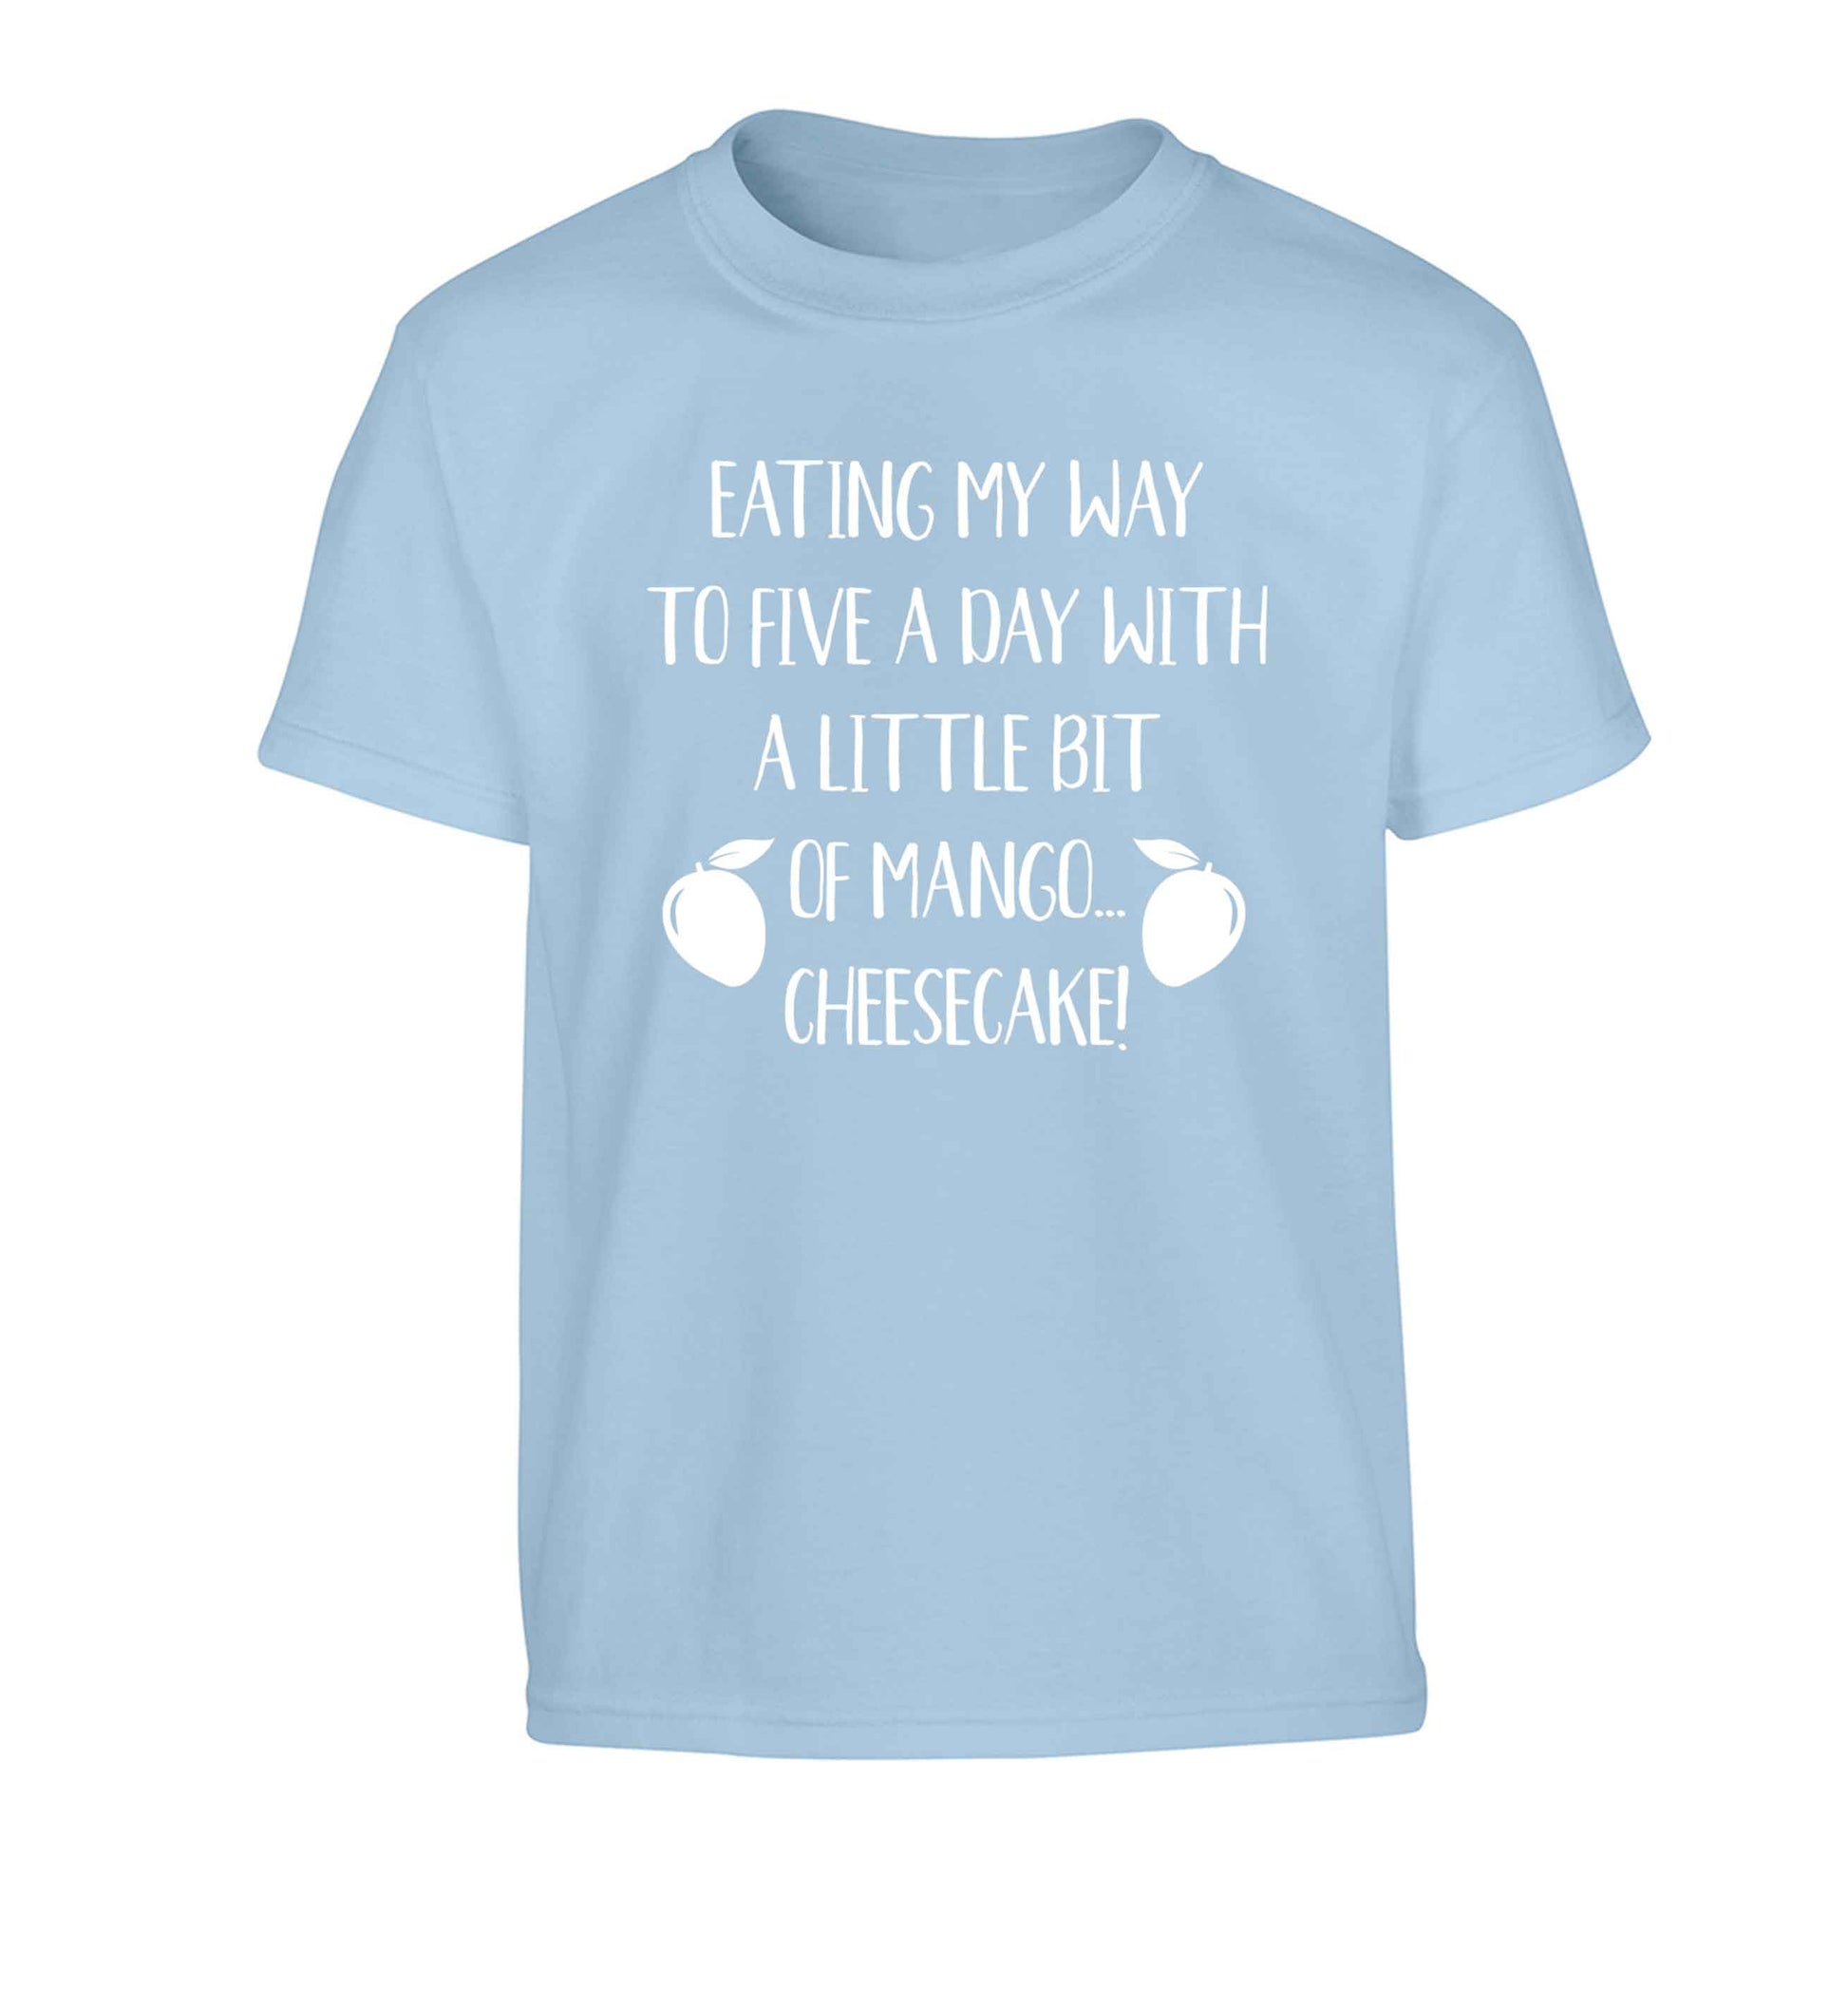 Eating my way to five a day with a little bit of mango cheesecake Children's light blue Tshirt 12-13 Years